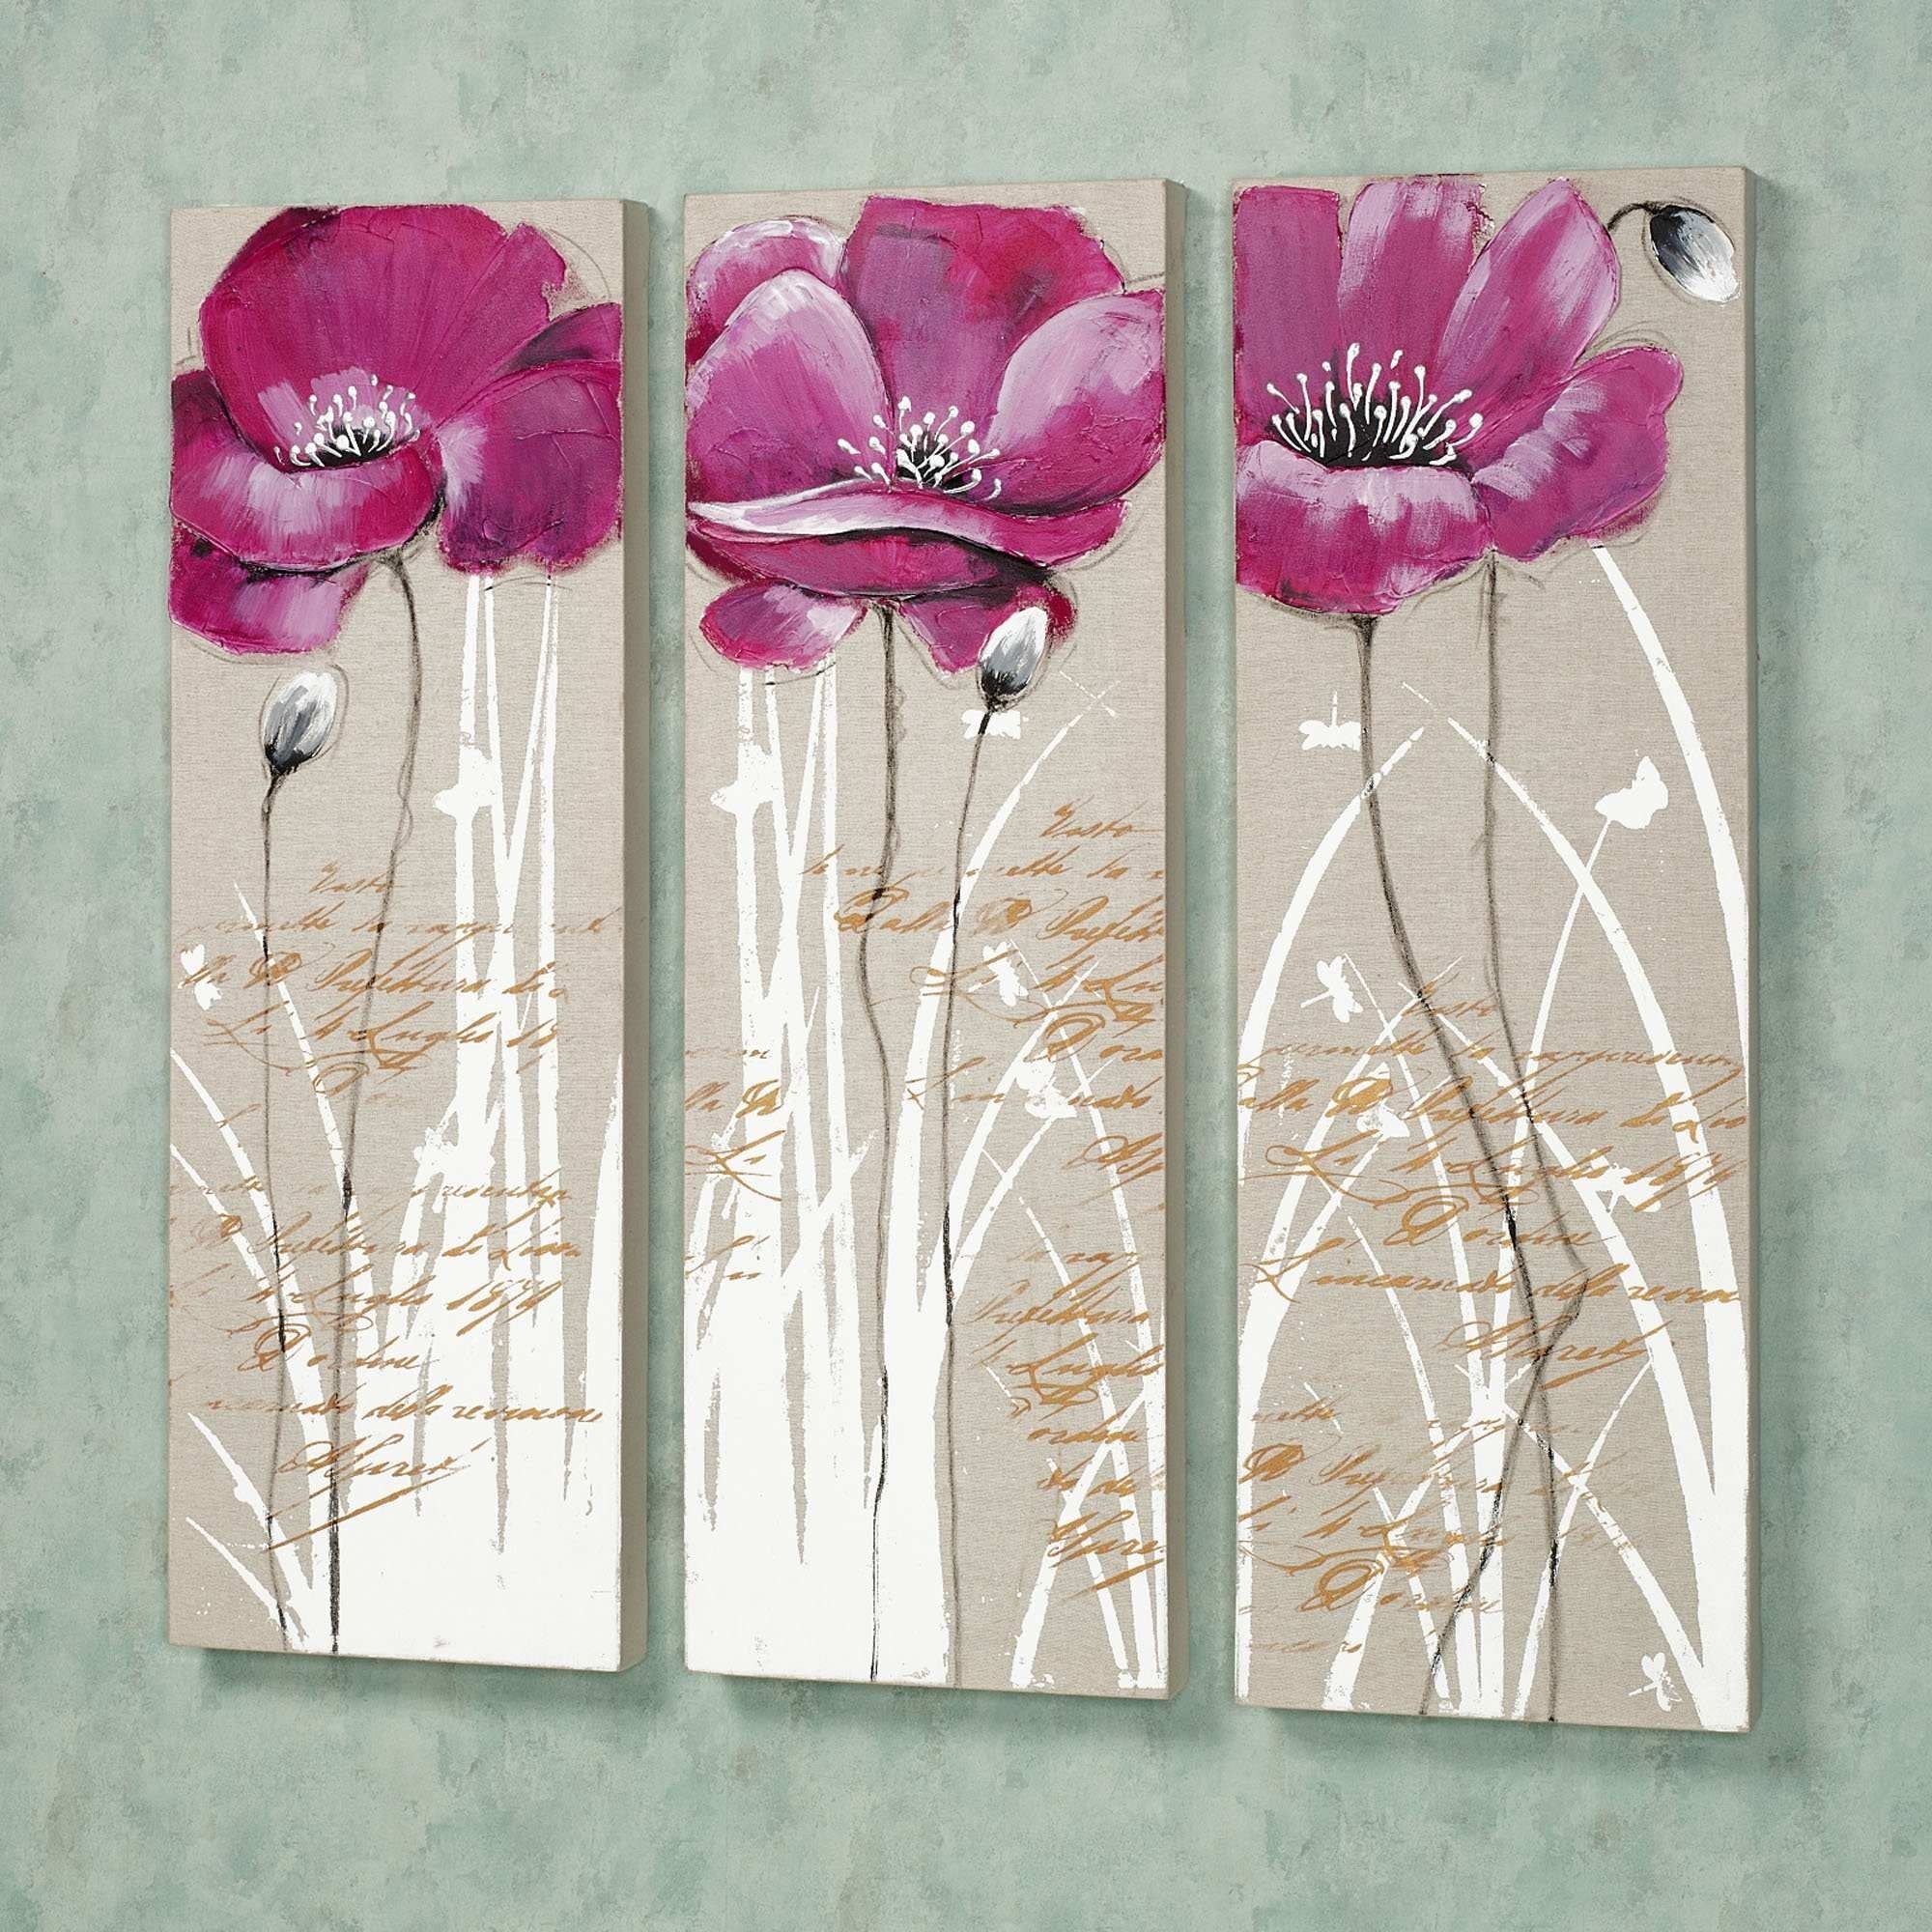 Flower Canvas Painting Inspirational Wall Art Designs Canvas Floral Within Floral Wall Art (View 17 of 20)